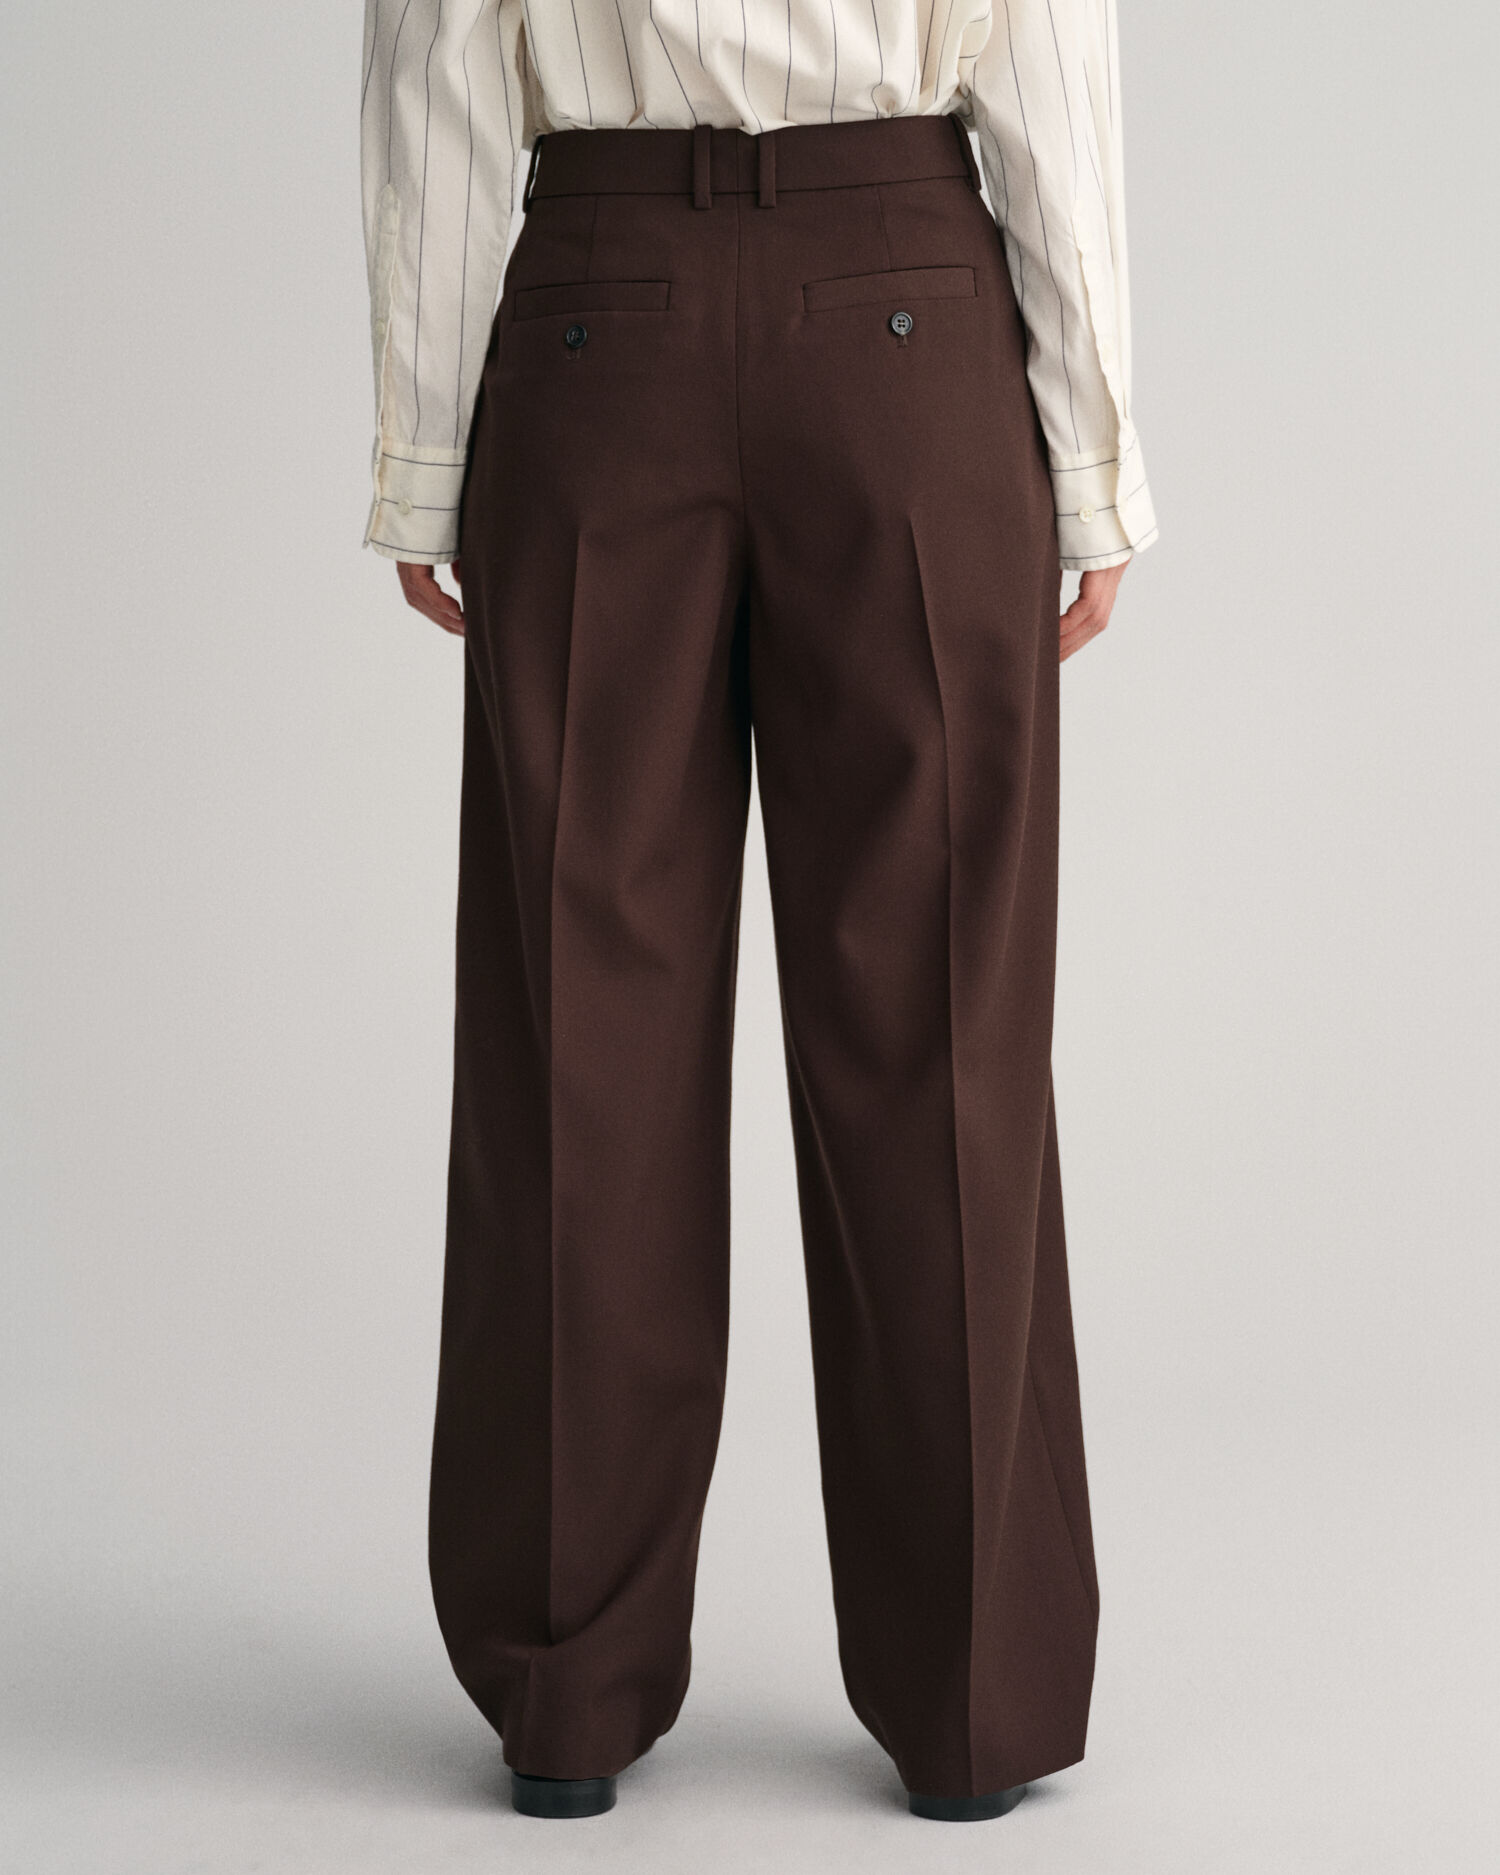 Relaxed Fit Tapered Leg Wool Pants - GANT